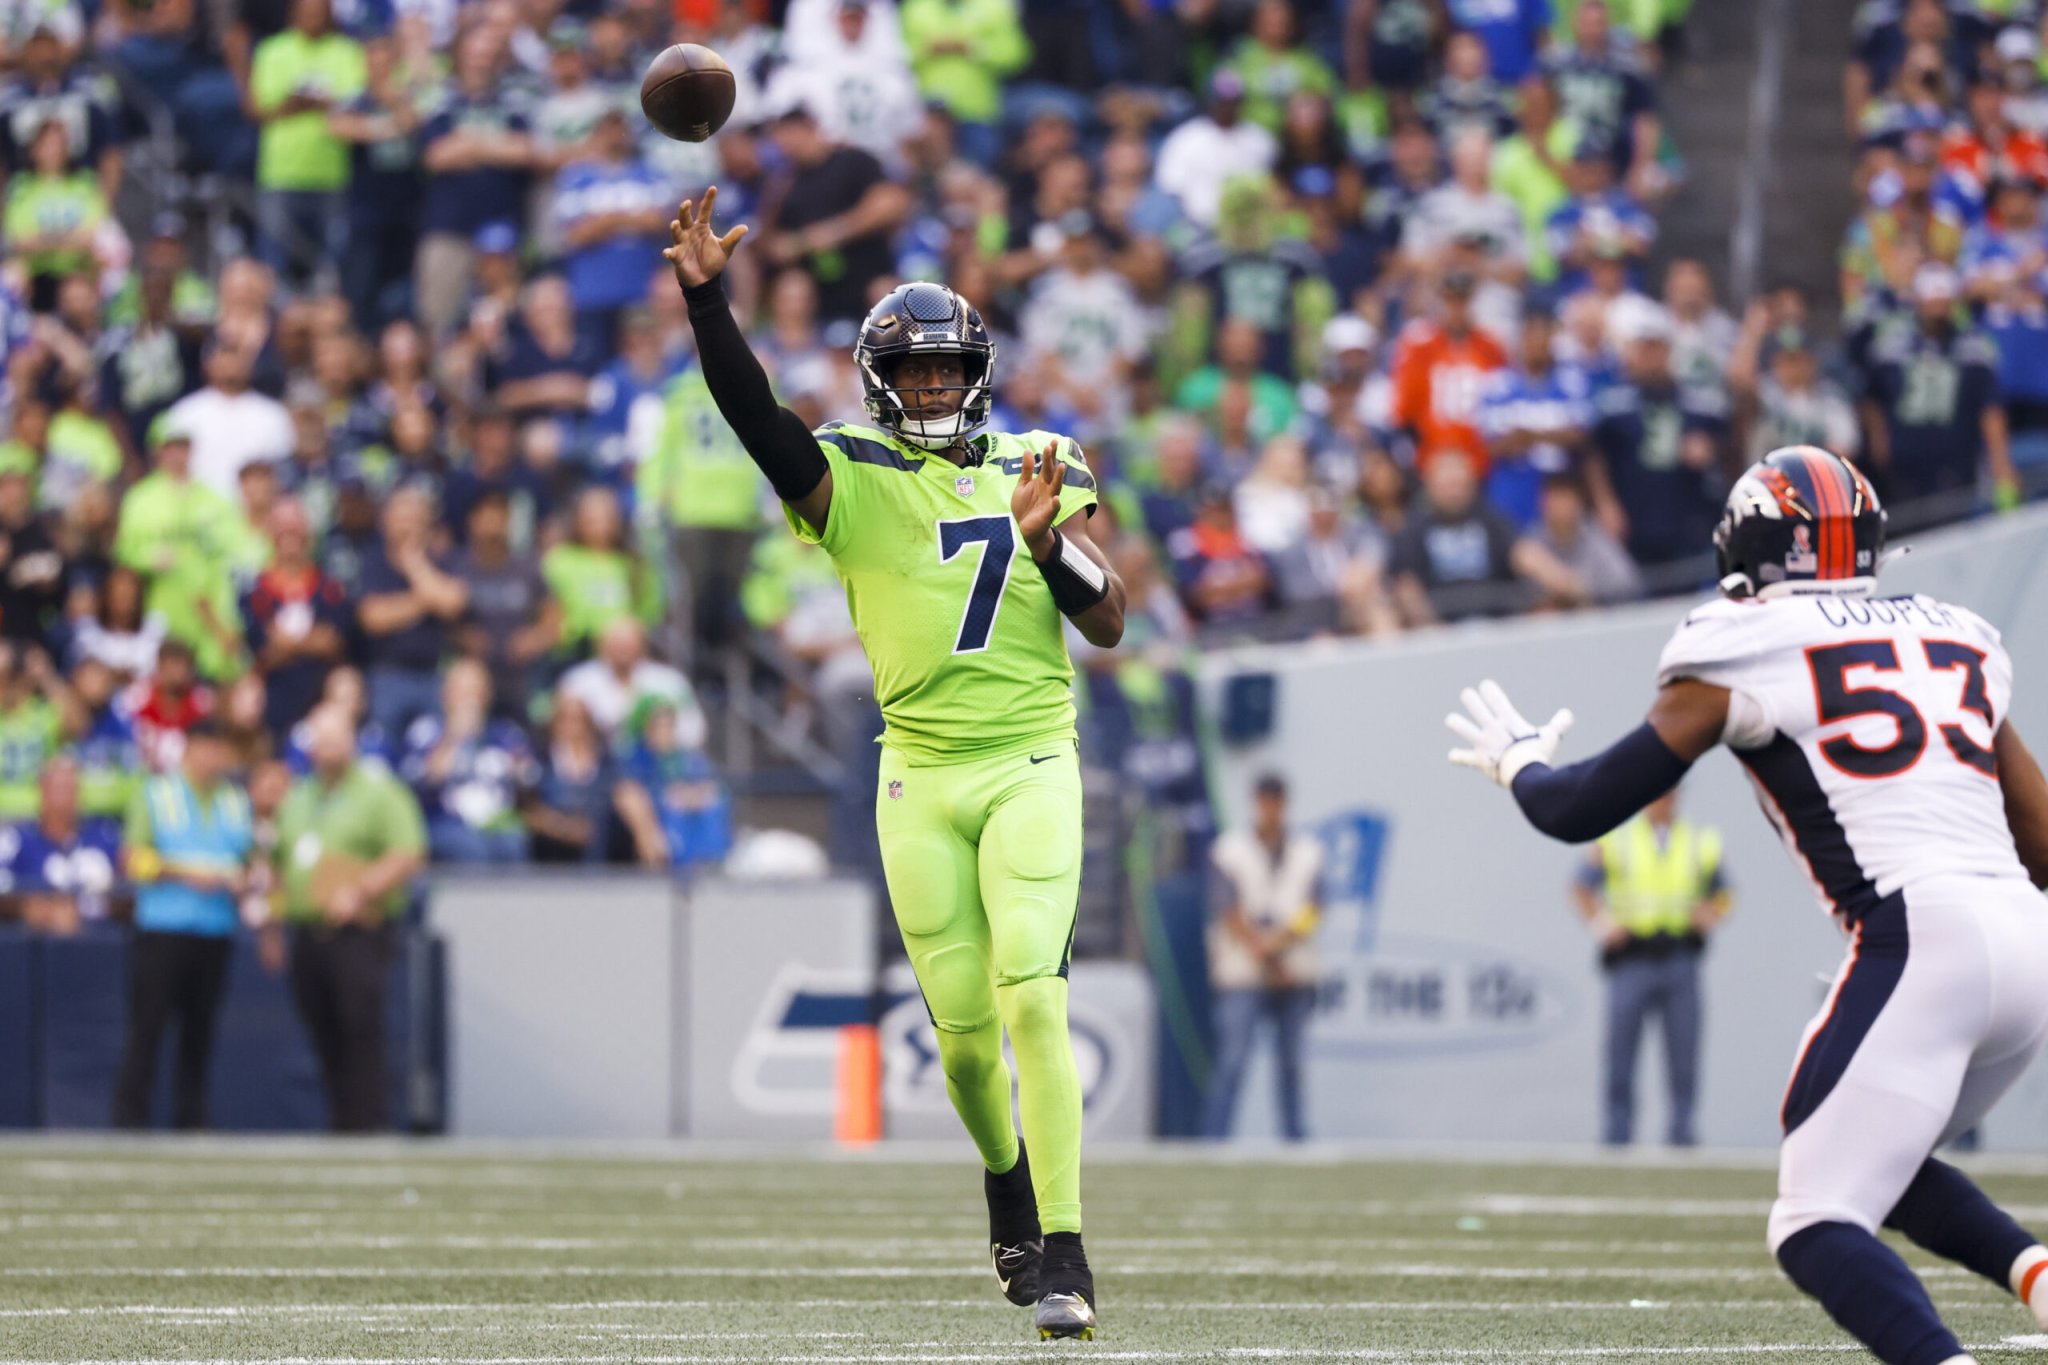 Newly minted as Seattle's starting quarterback, Geno Smith leads the